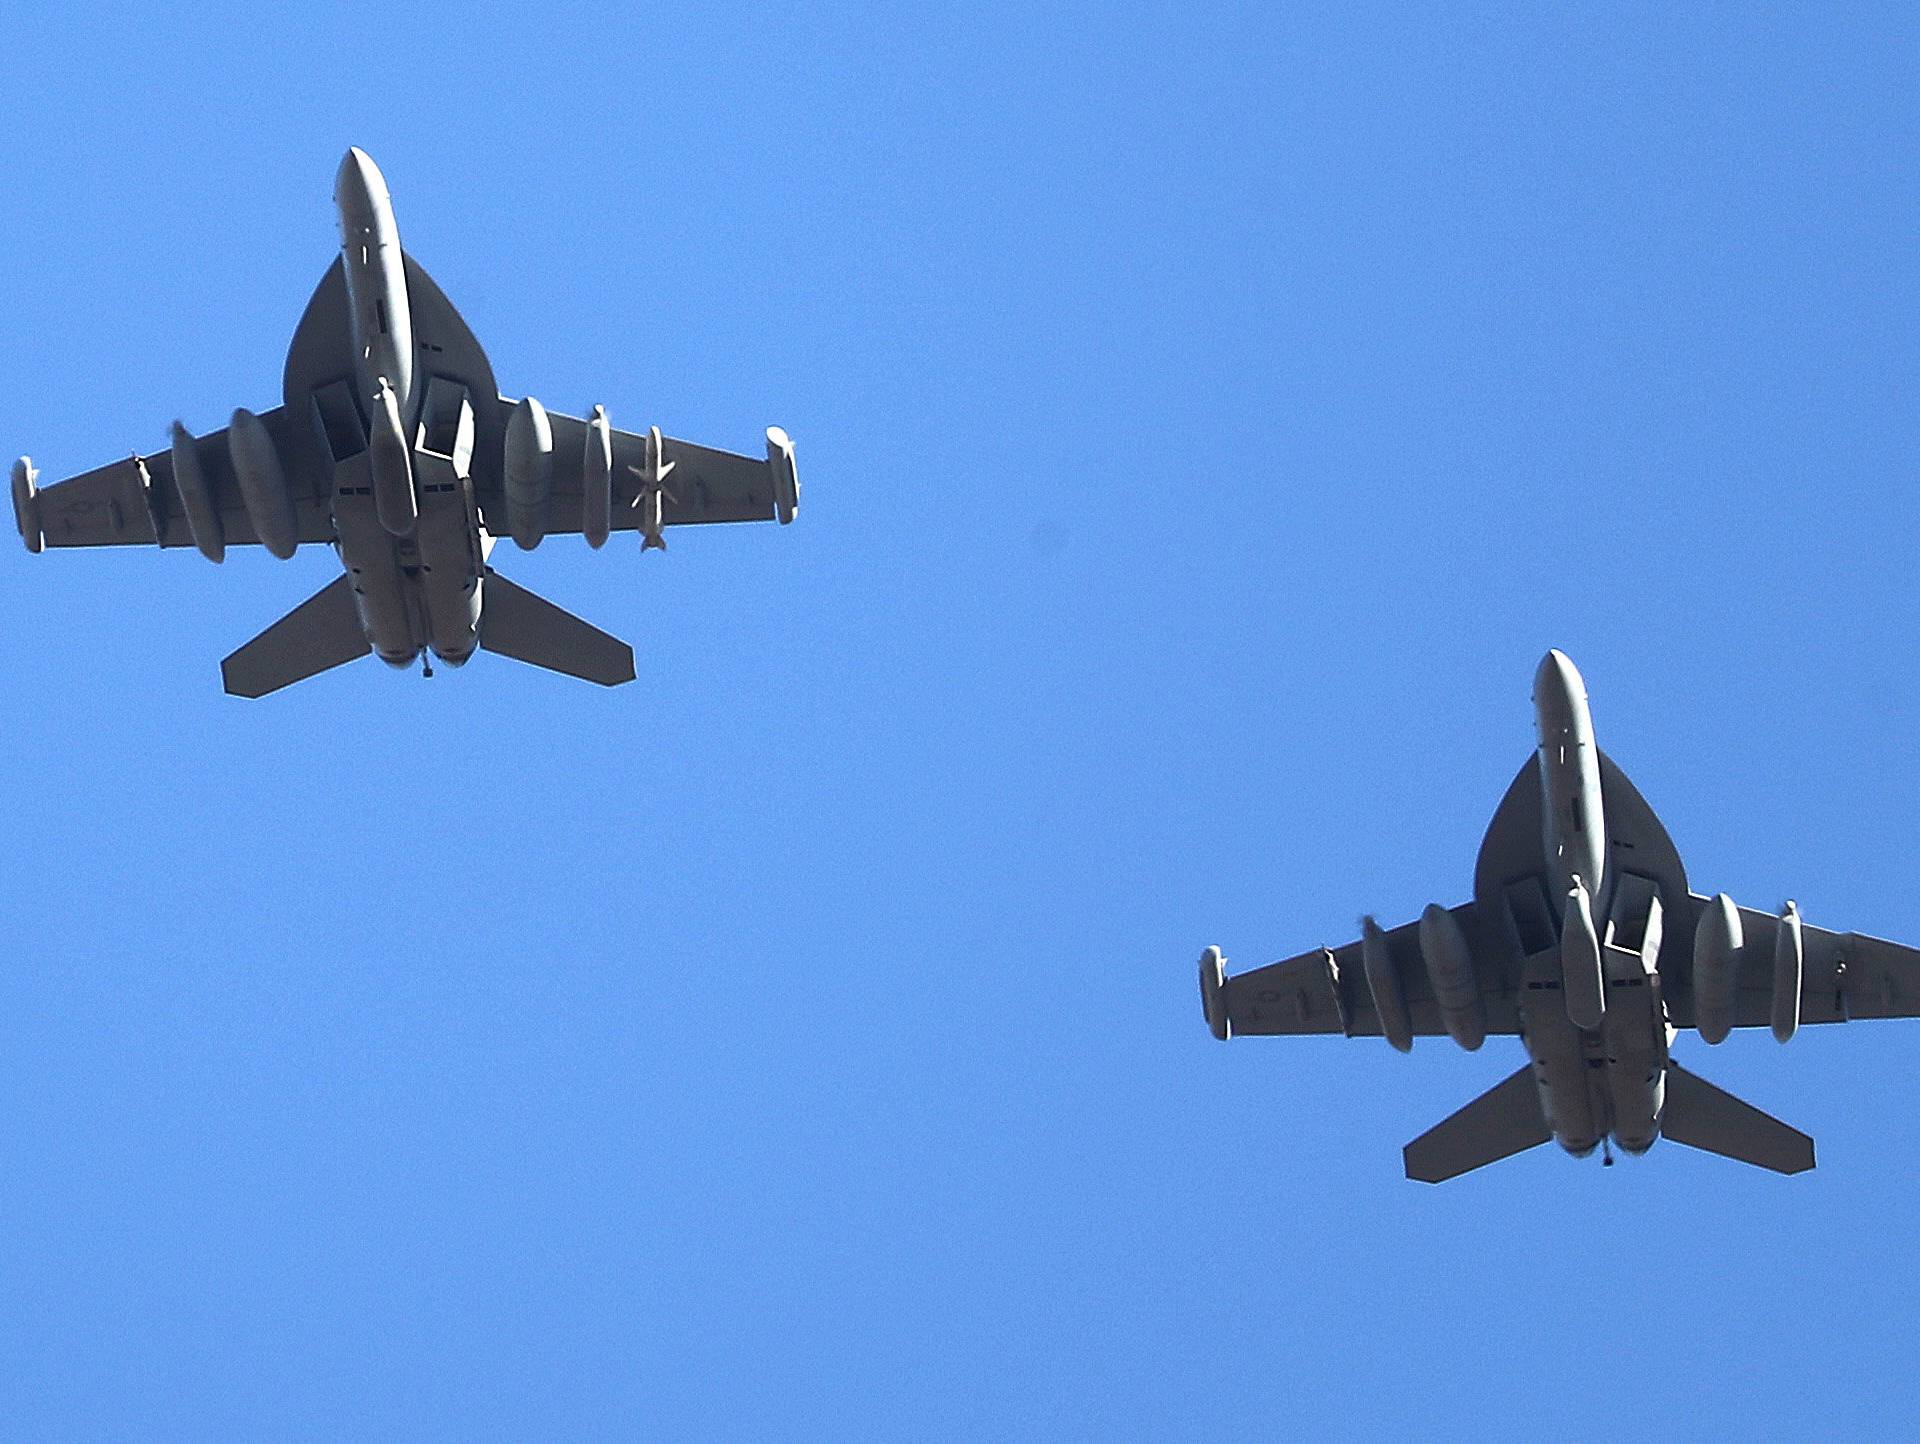 U.S. Air Force EA-18G Growler fighter jets fly over the Osan Air Base in Pyeongtaek